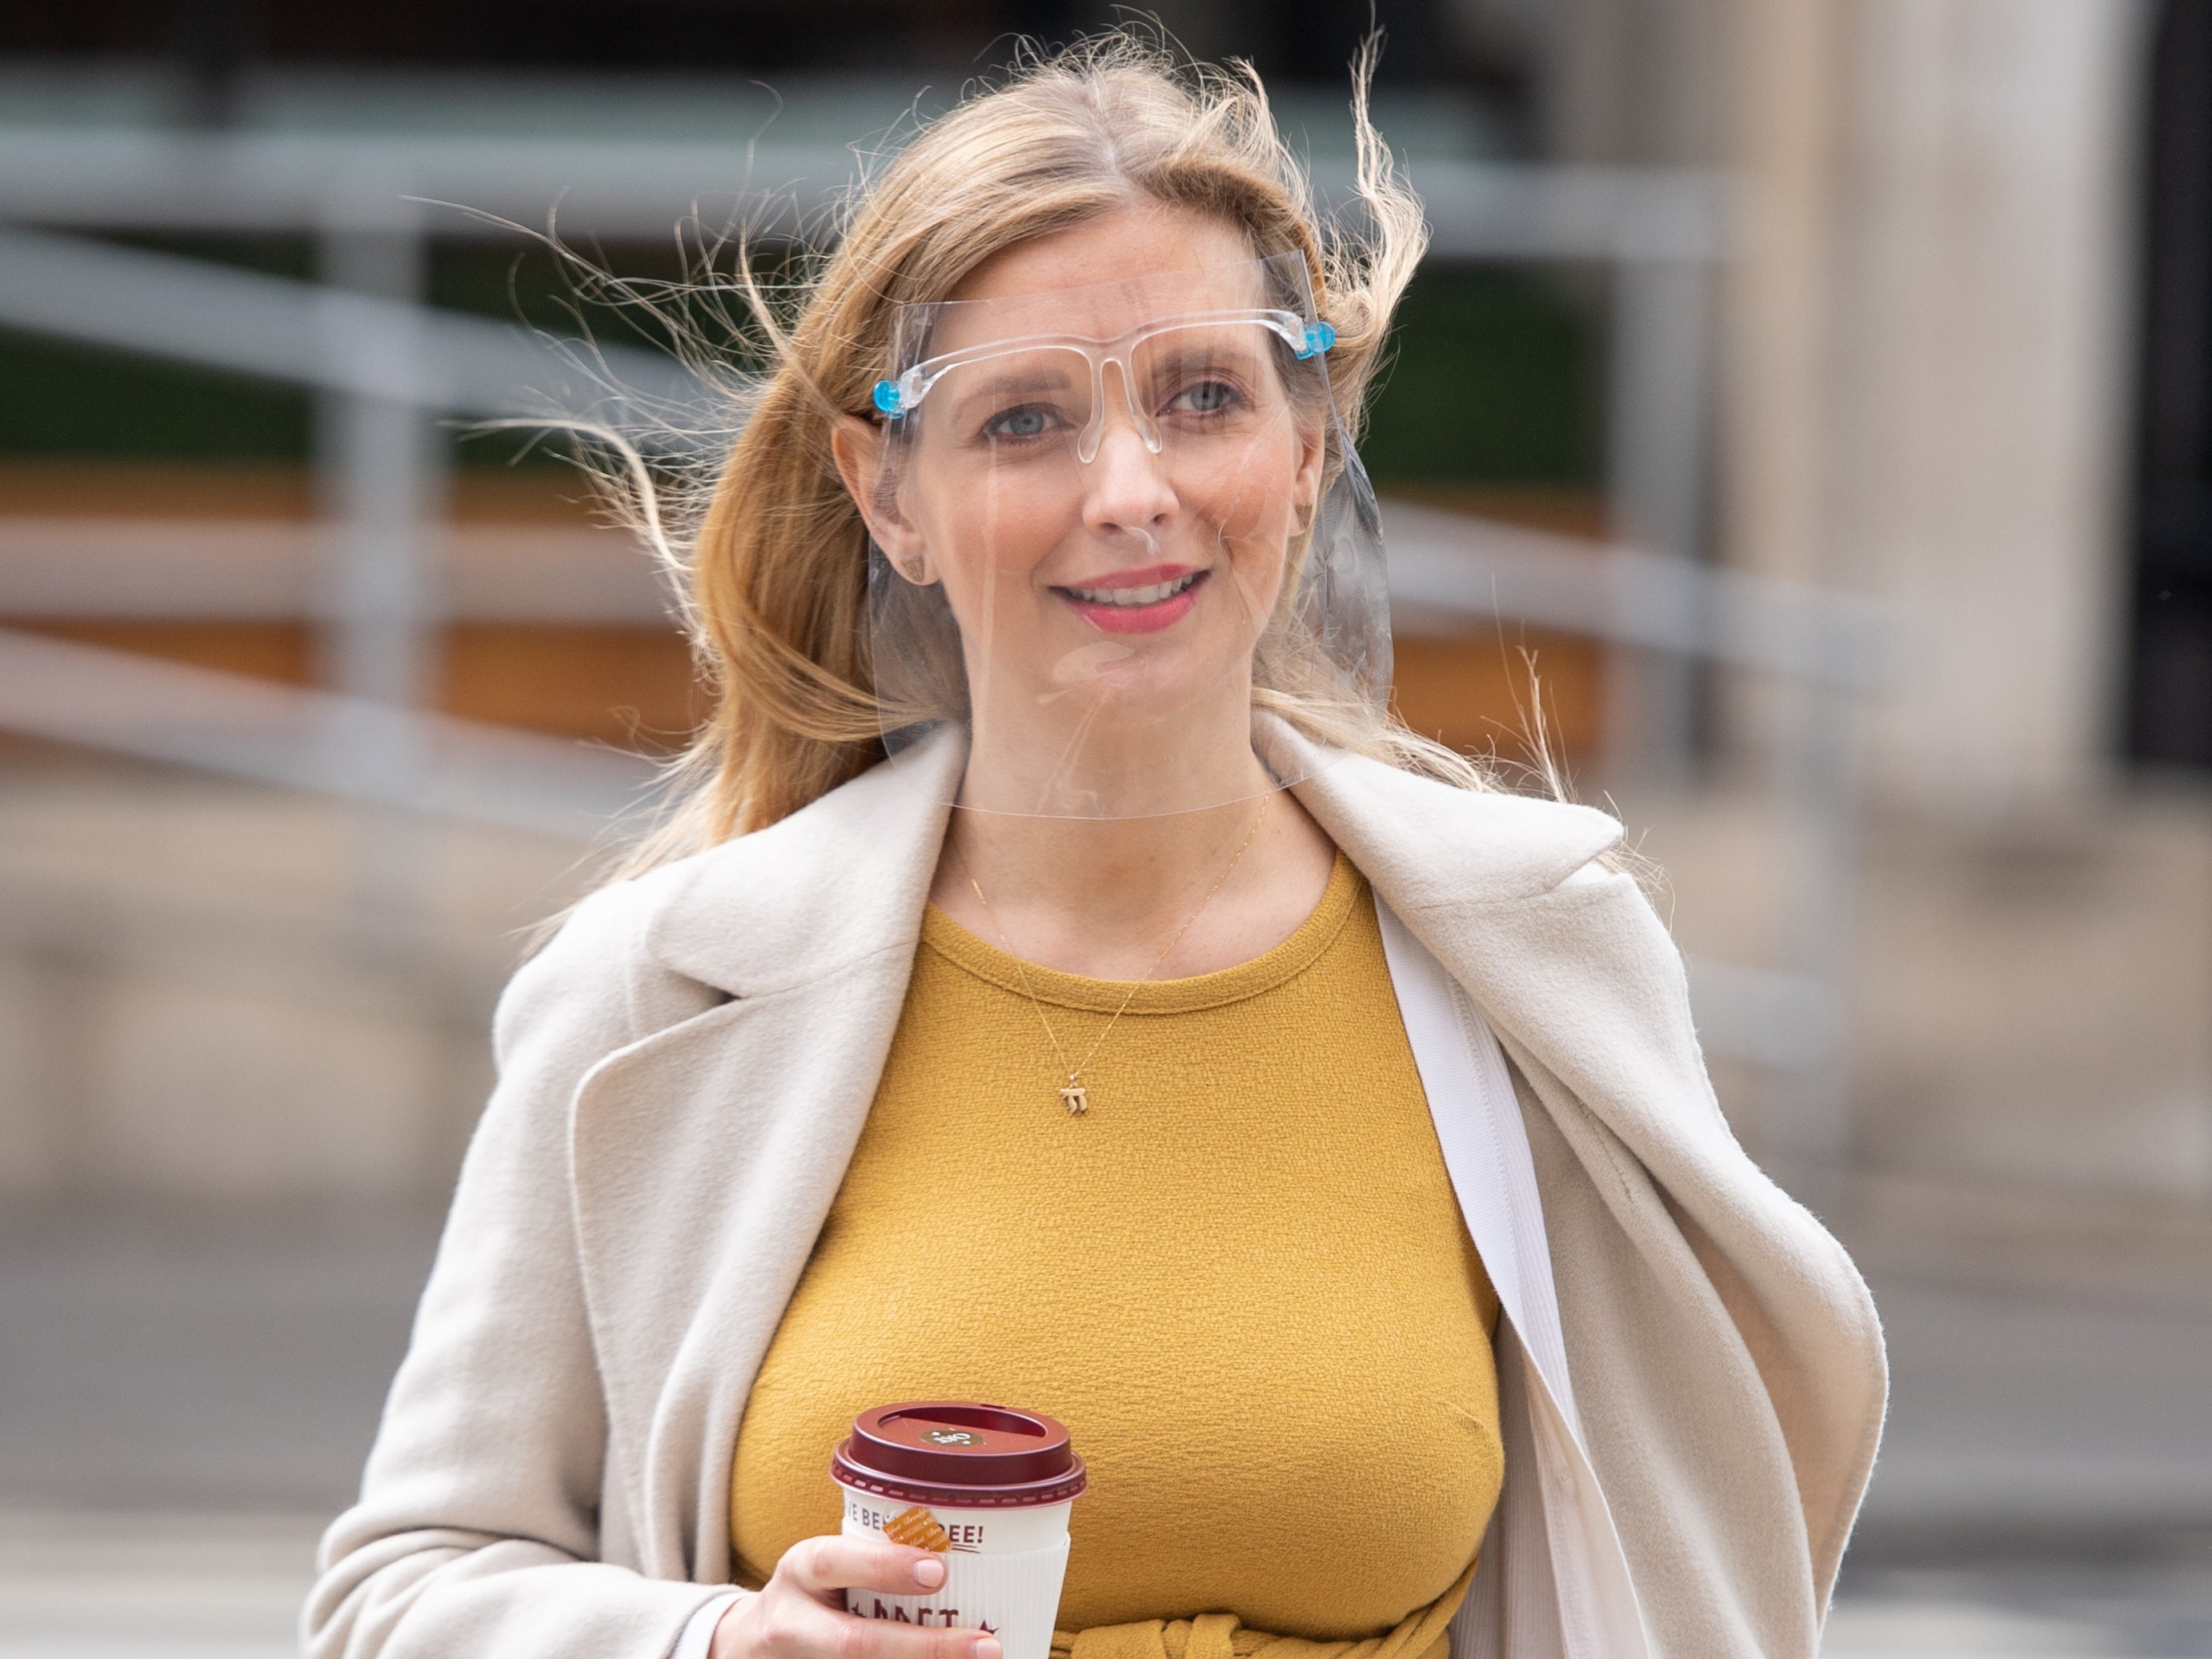 Rachel Riley arrives at the Royal Courts of Justice for a libel case (Dominic Lipinski/PA)